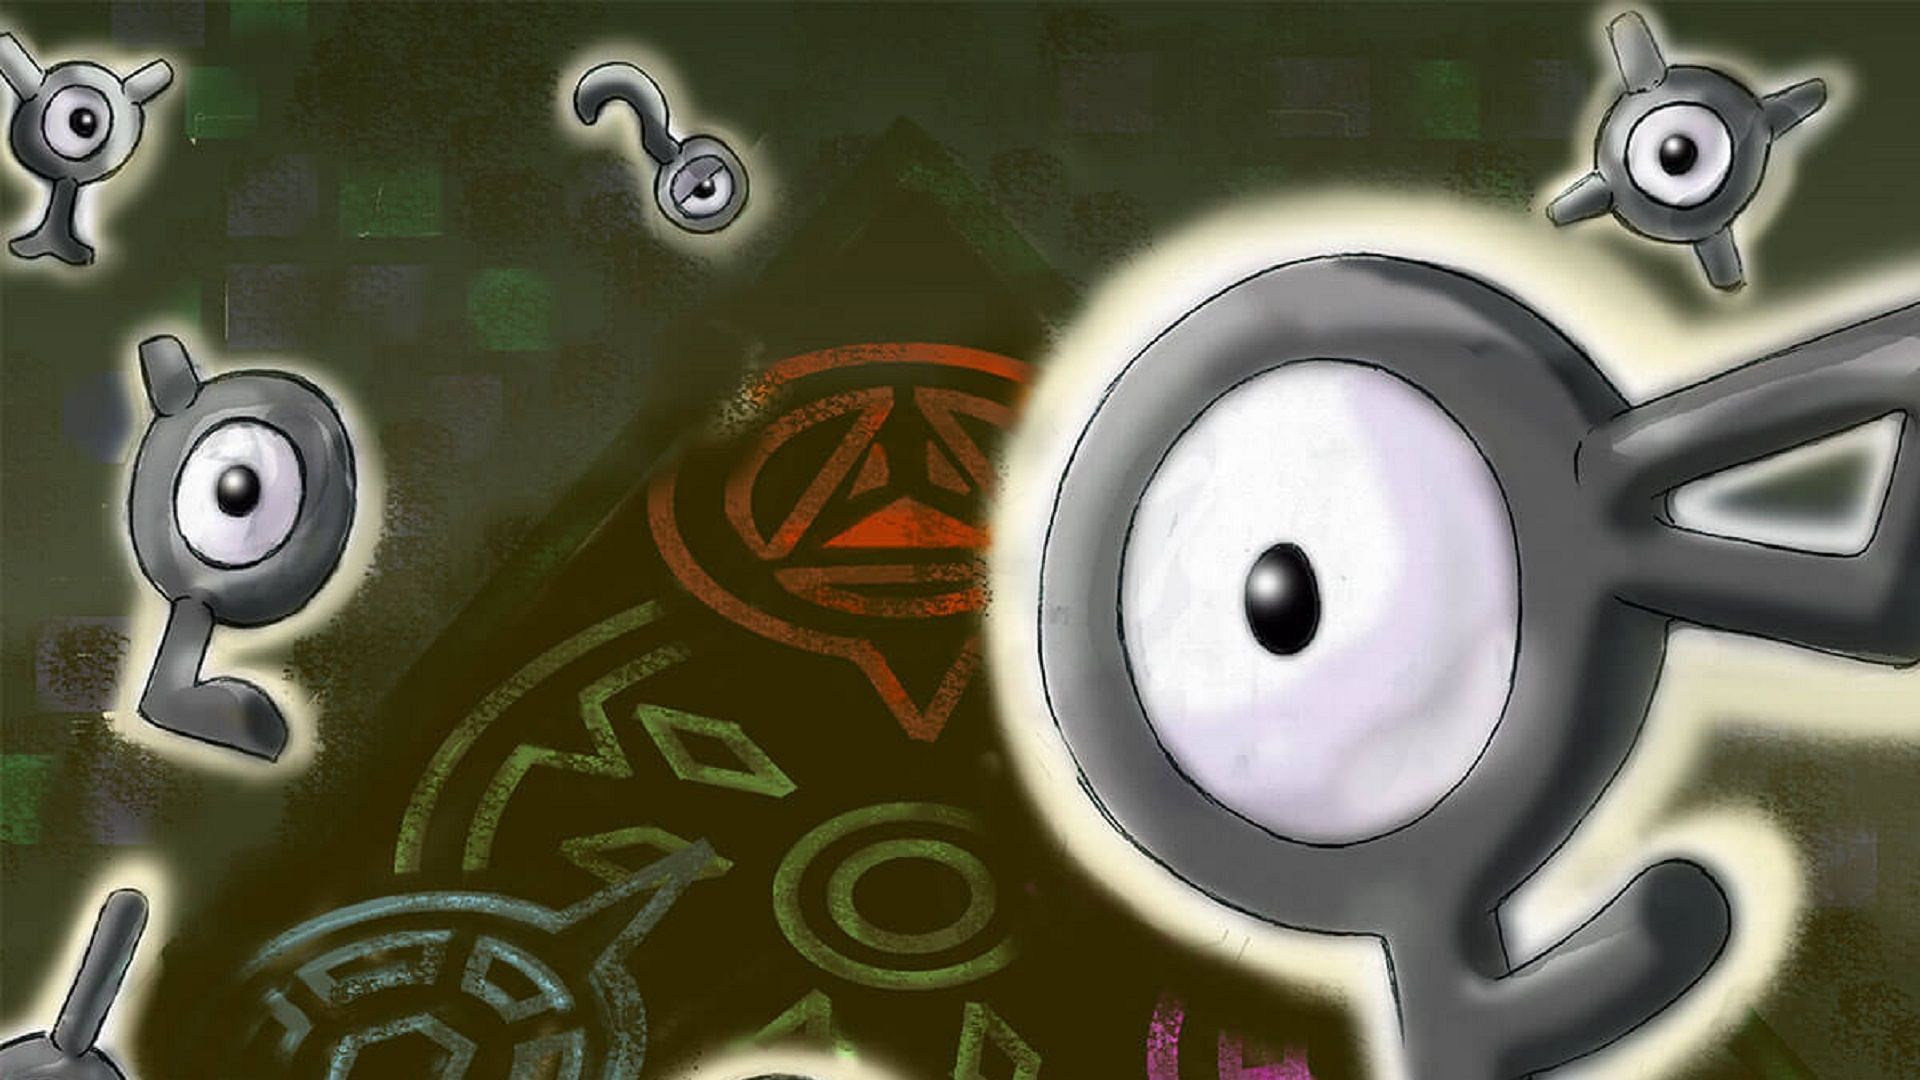 An official fan site may point to the Ultra Beasts being connected to Unown. (Image via Pokemon Daisuke Club)